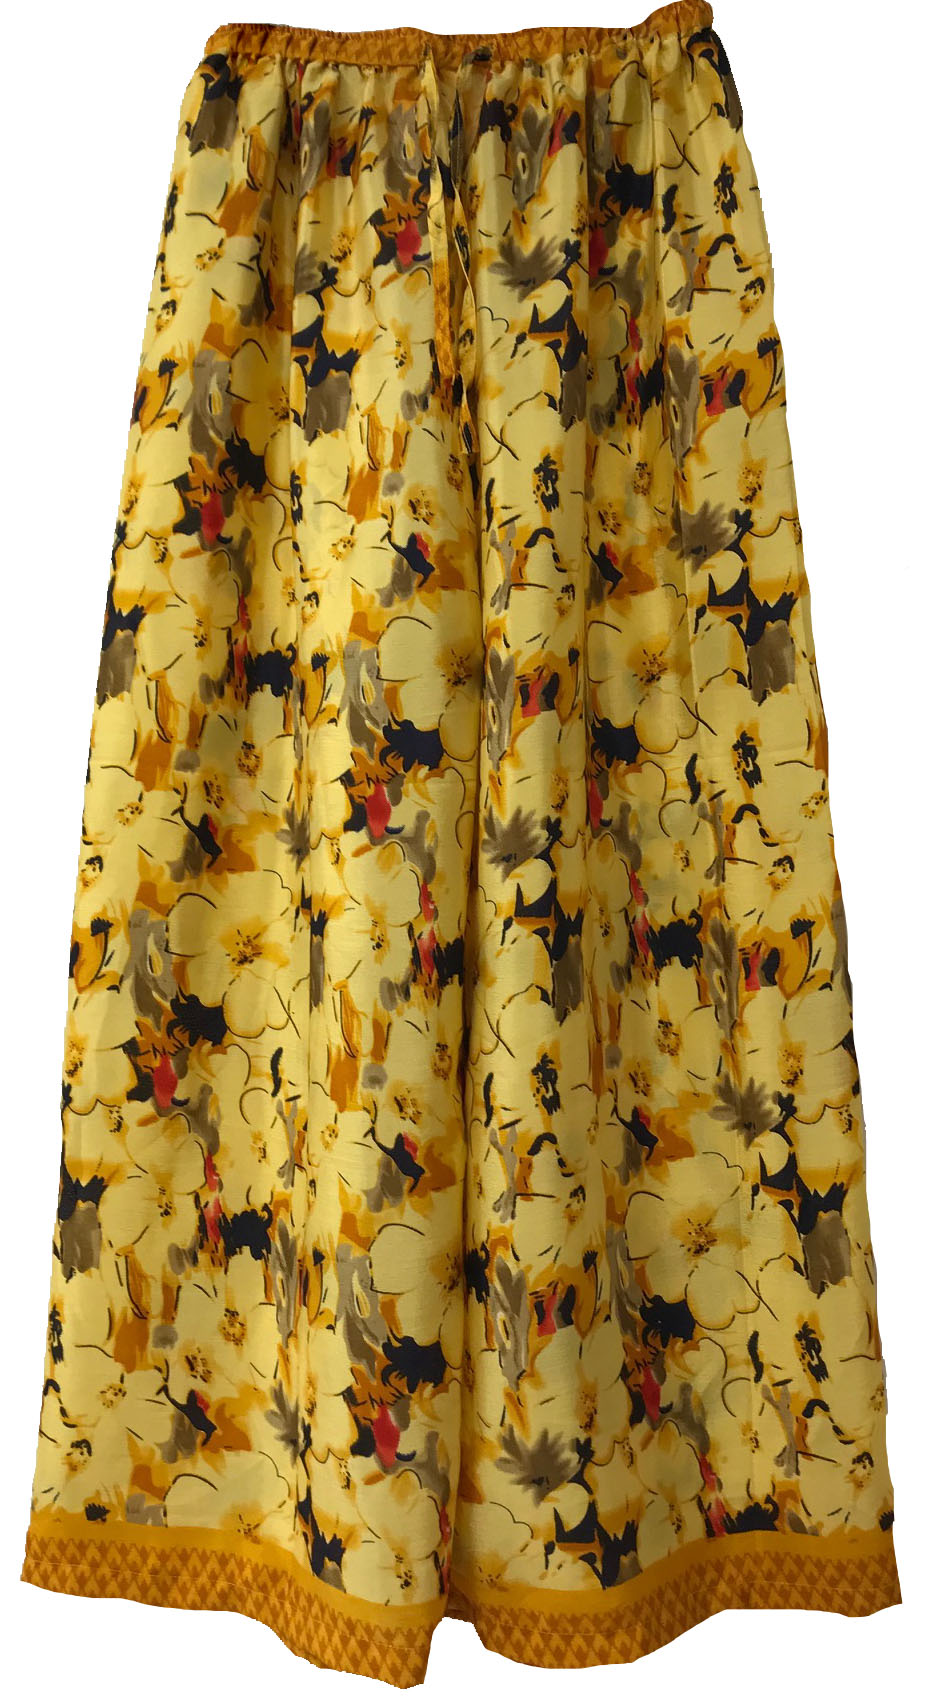 Floral Elastic Pants in sunny yellow